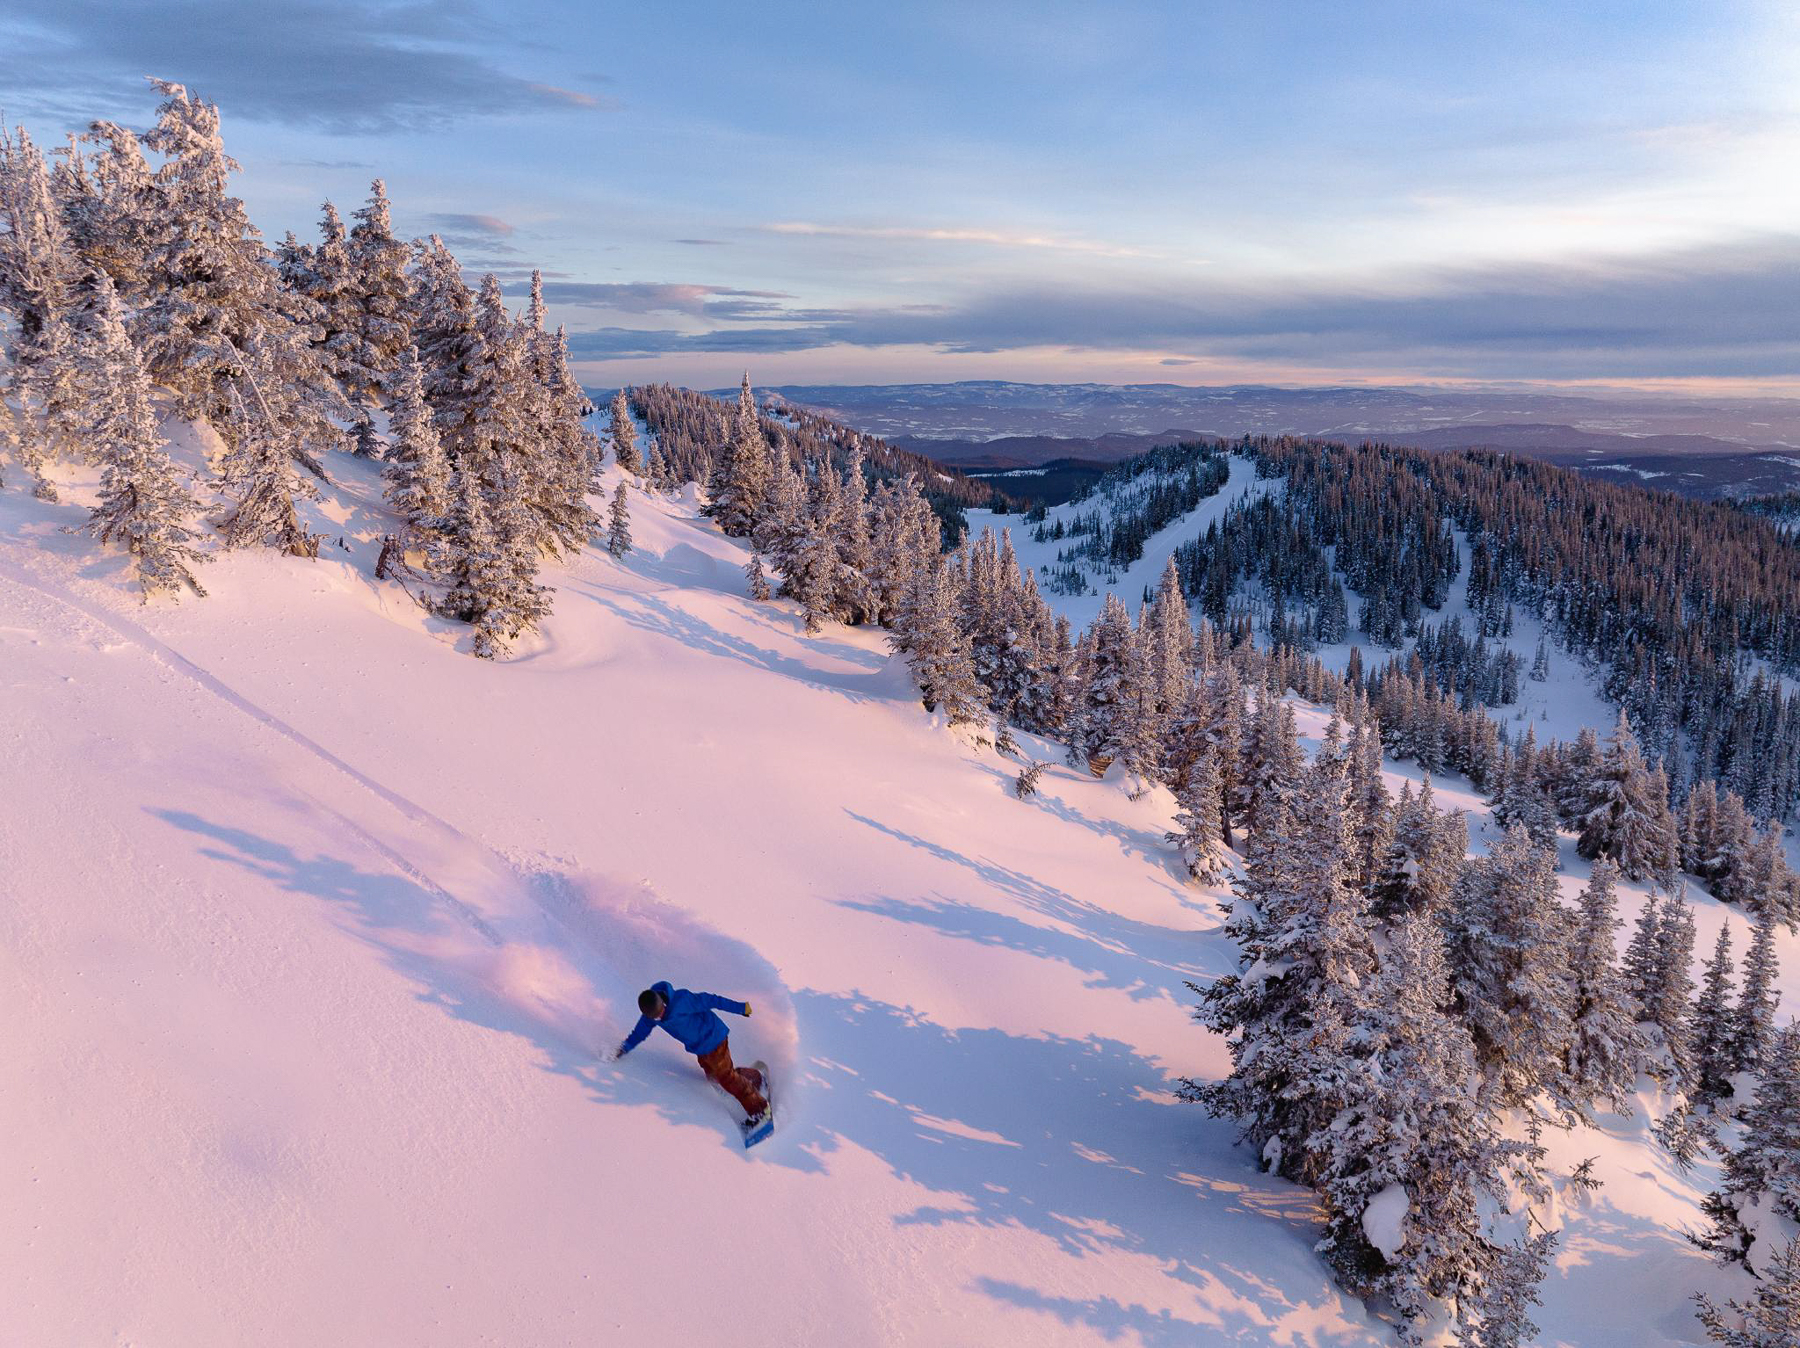 Snowboarder riding down the mountain between trees during sunset